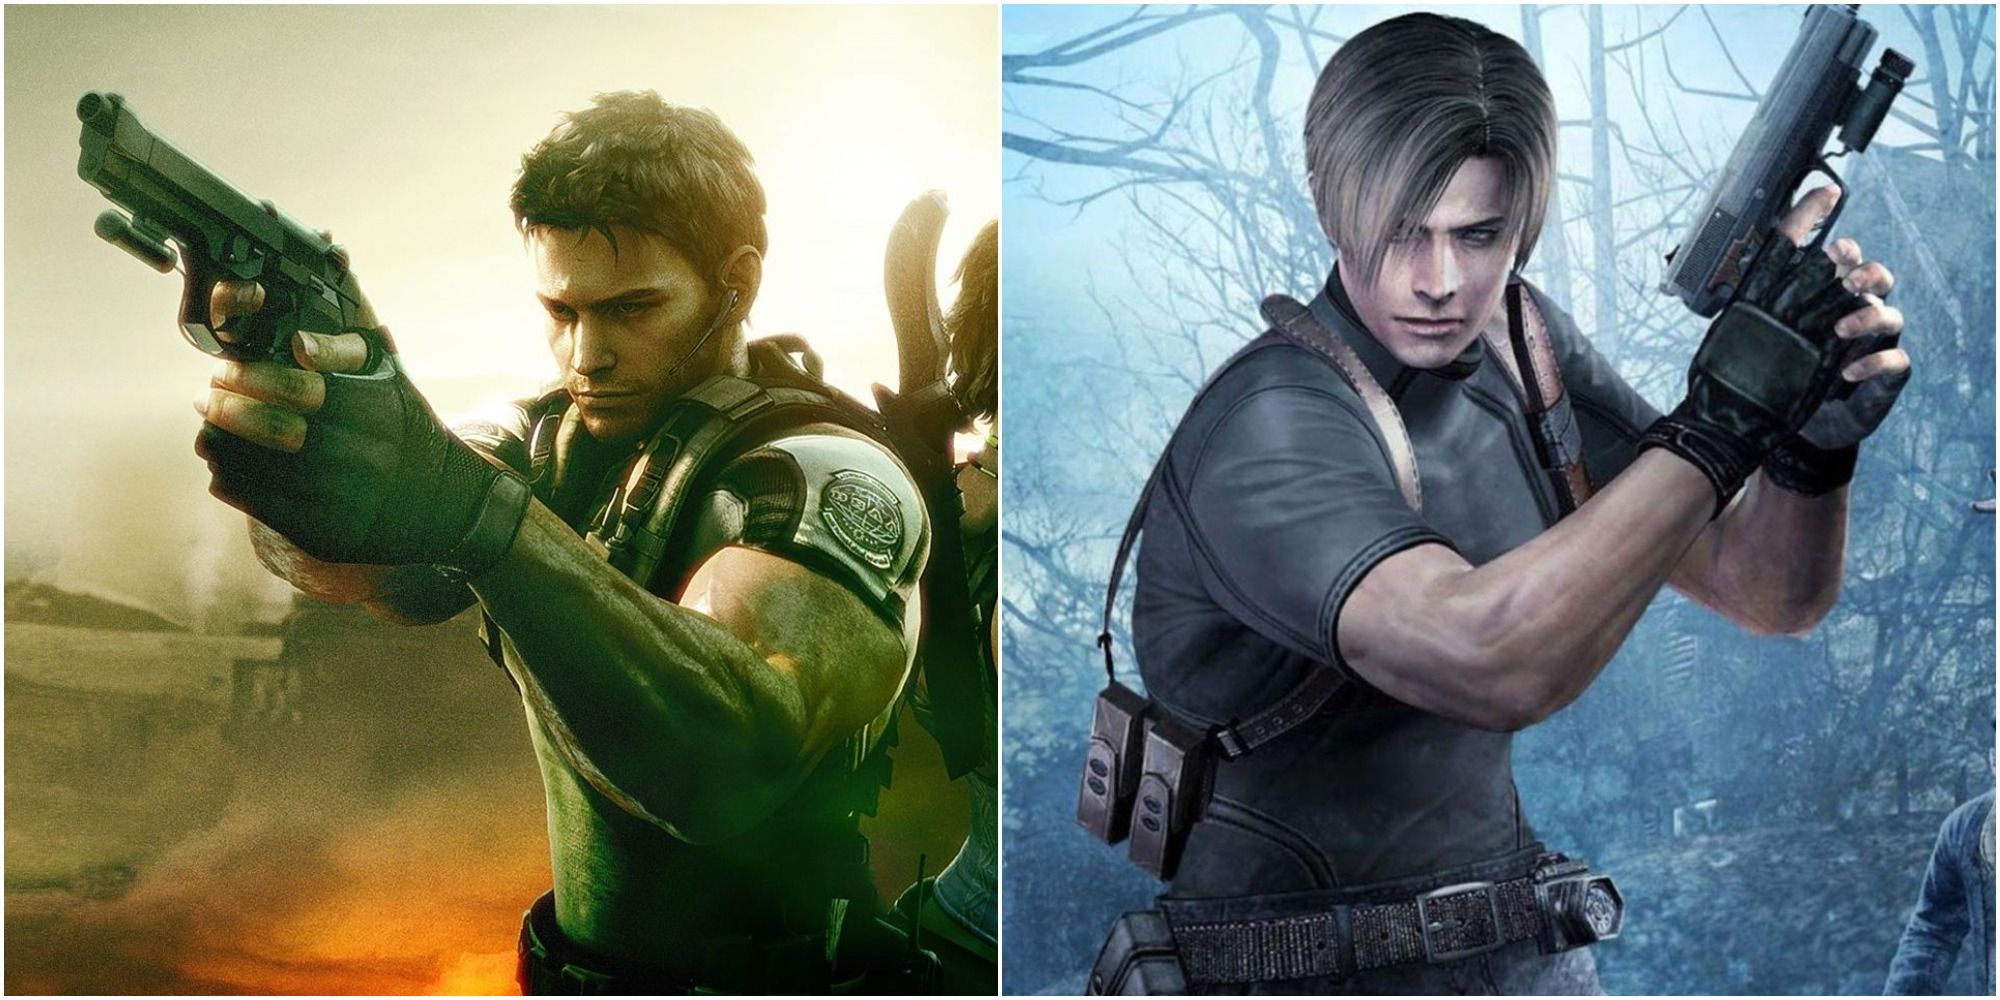 Chris Redfield And Leon Kennedy Holding Pistols